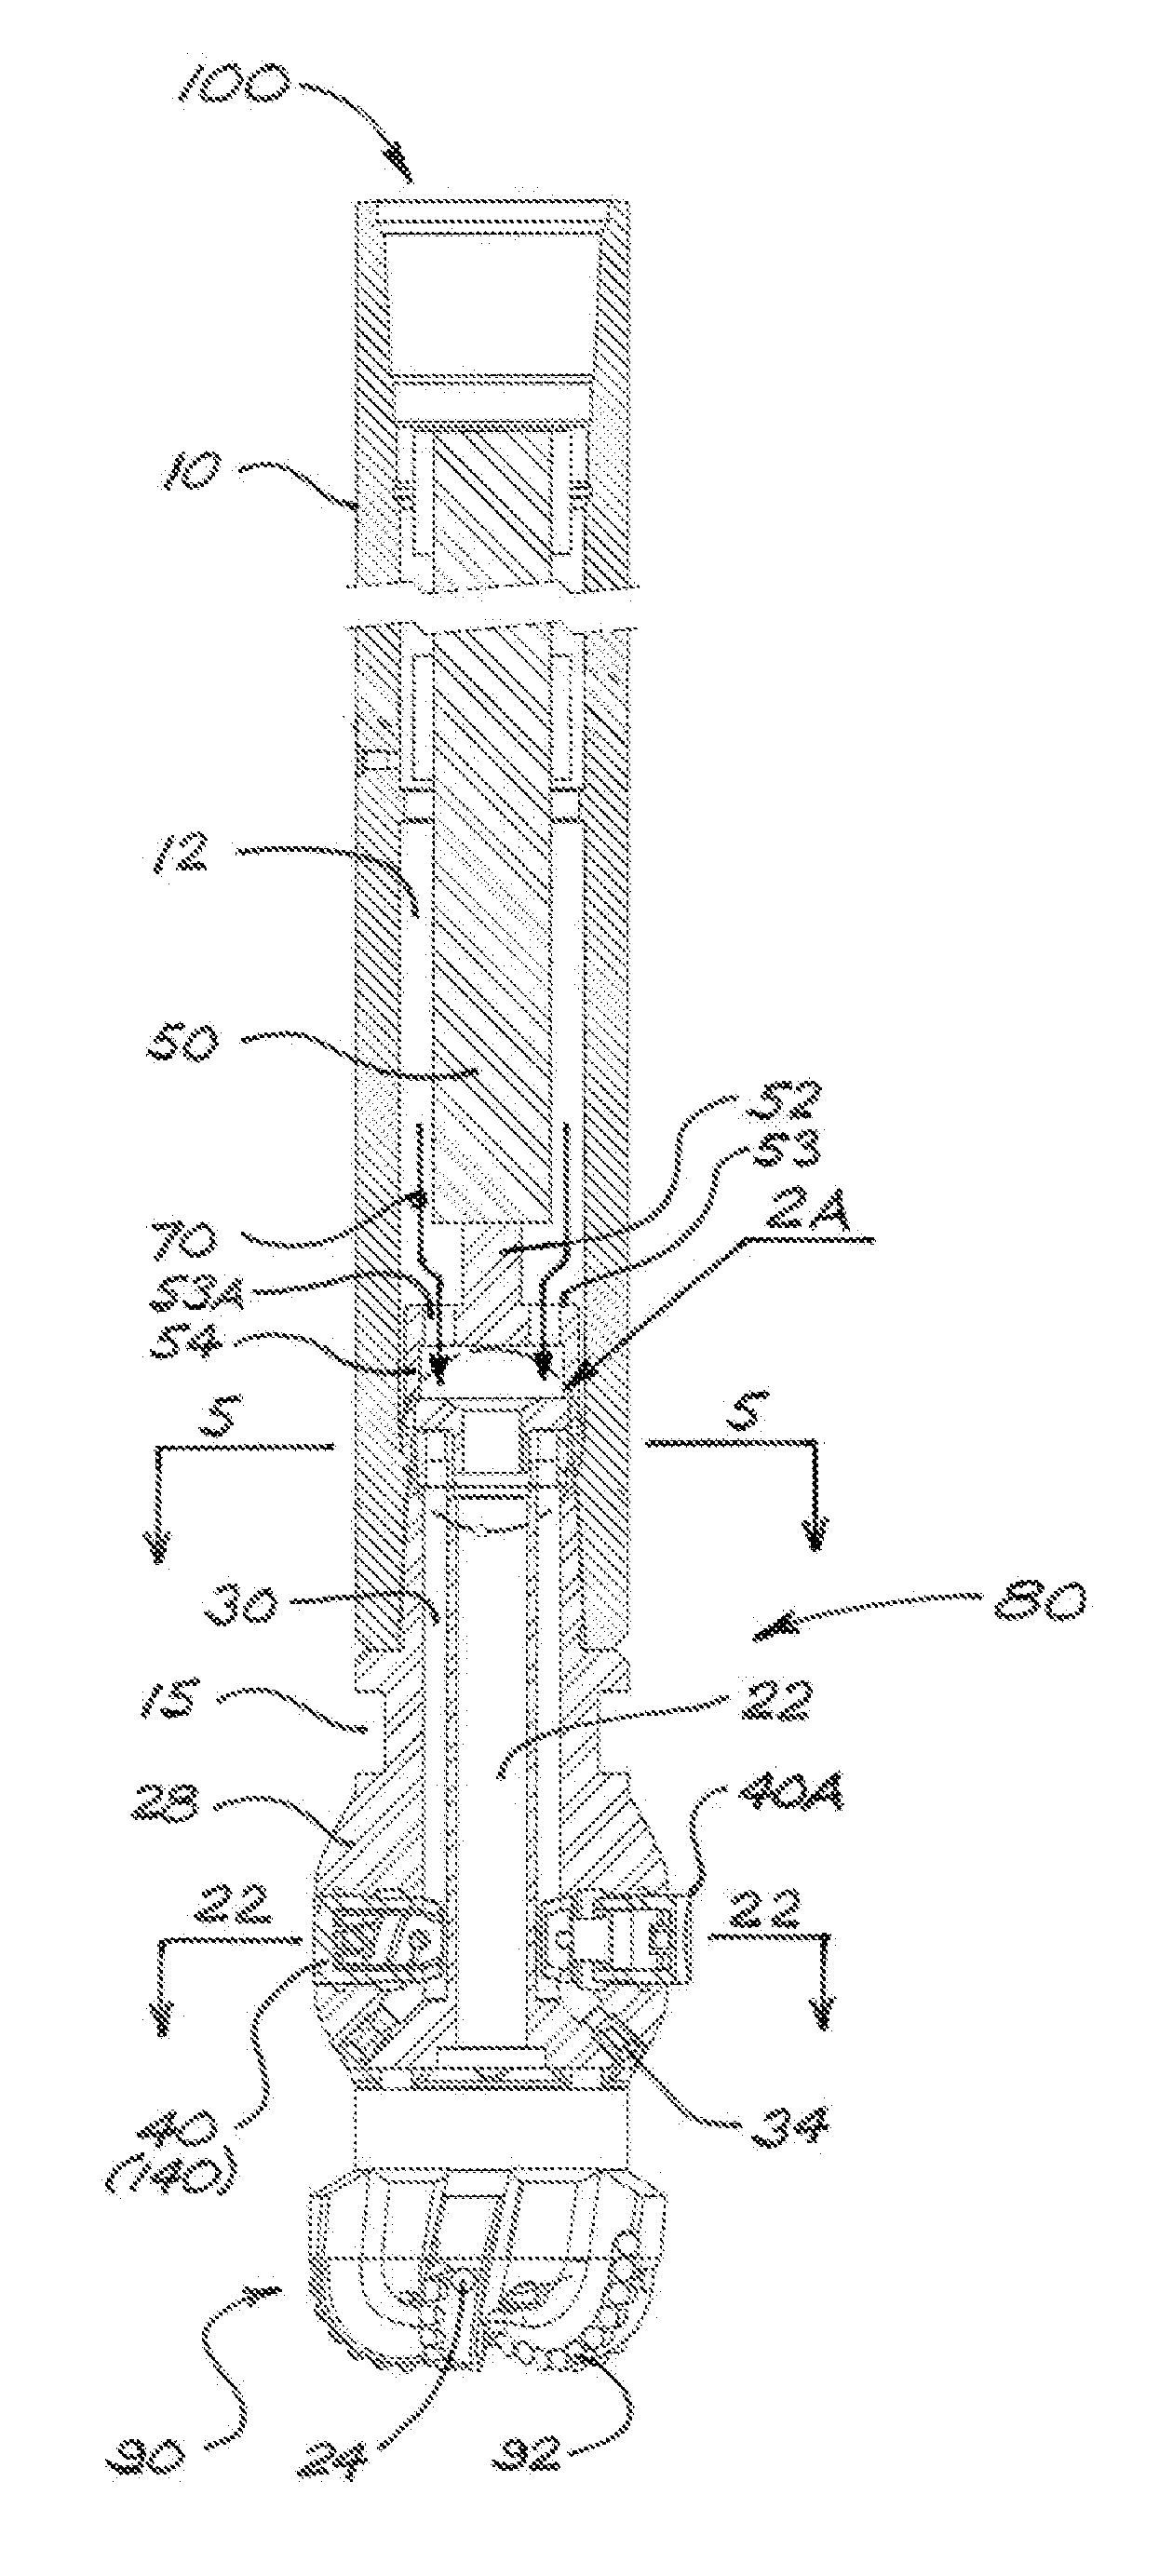 Downhole rotary drilling apparatus with formation-interfacing members and control system